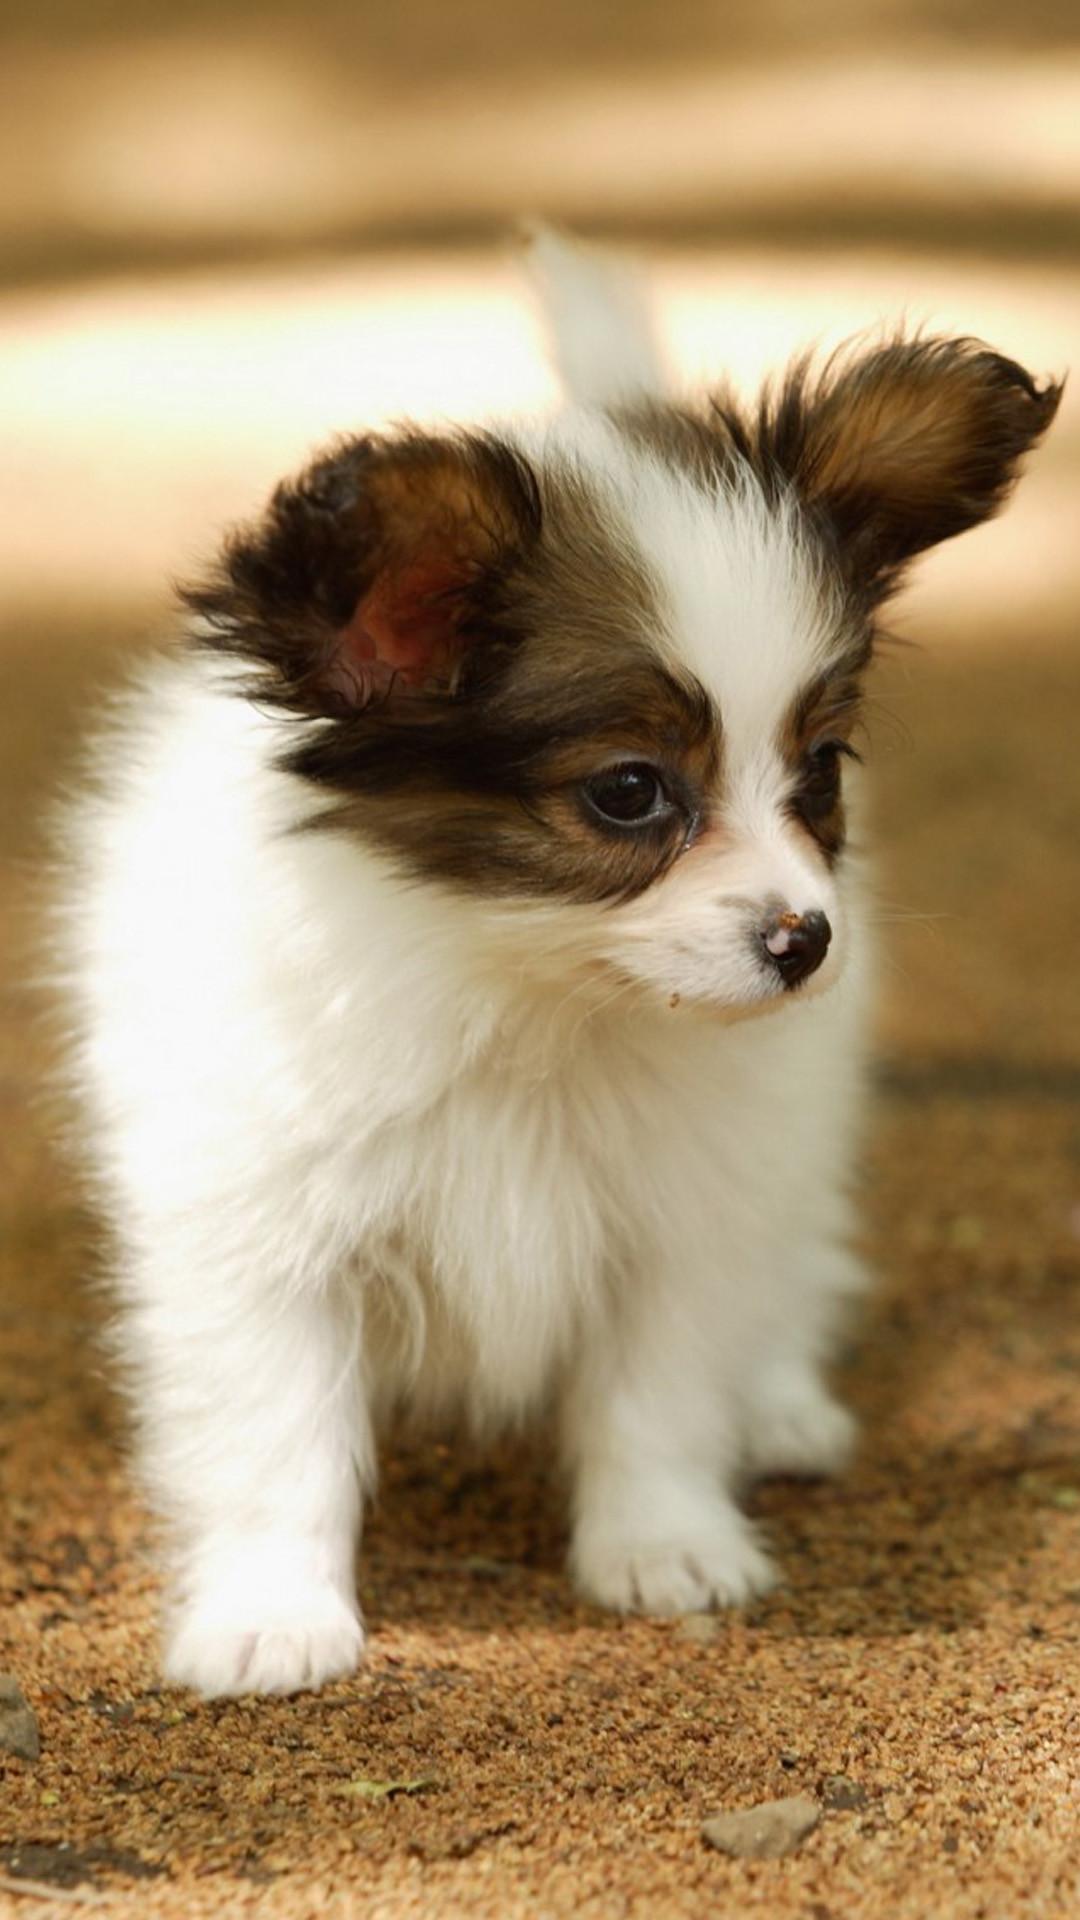 Cute Lovely Puppy Walking Dog Animal Iphone 6 Wallpaper - Cute Animal Backgrounds Iphone - HD Wallpaper 